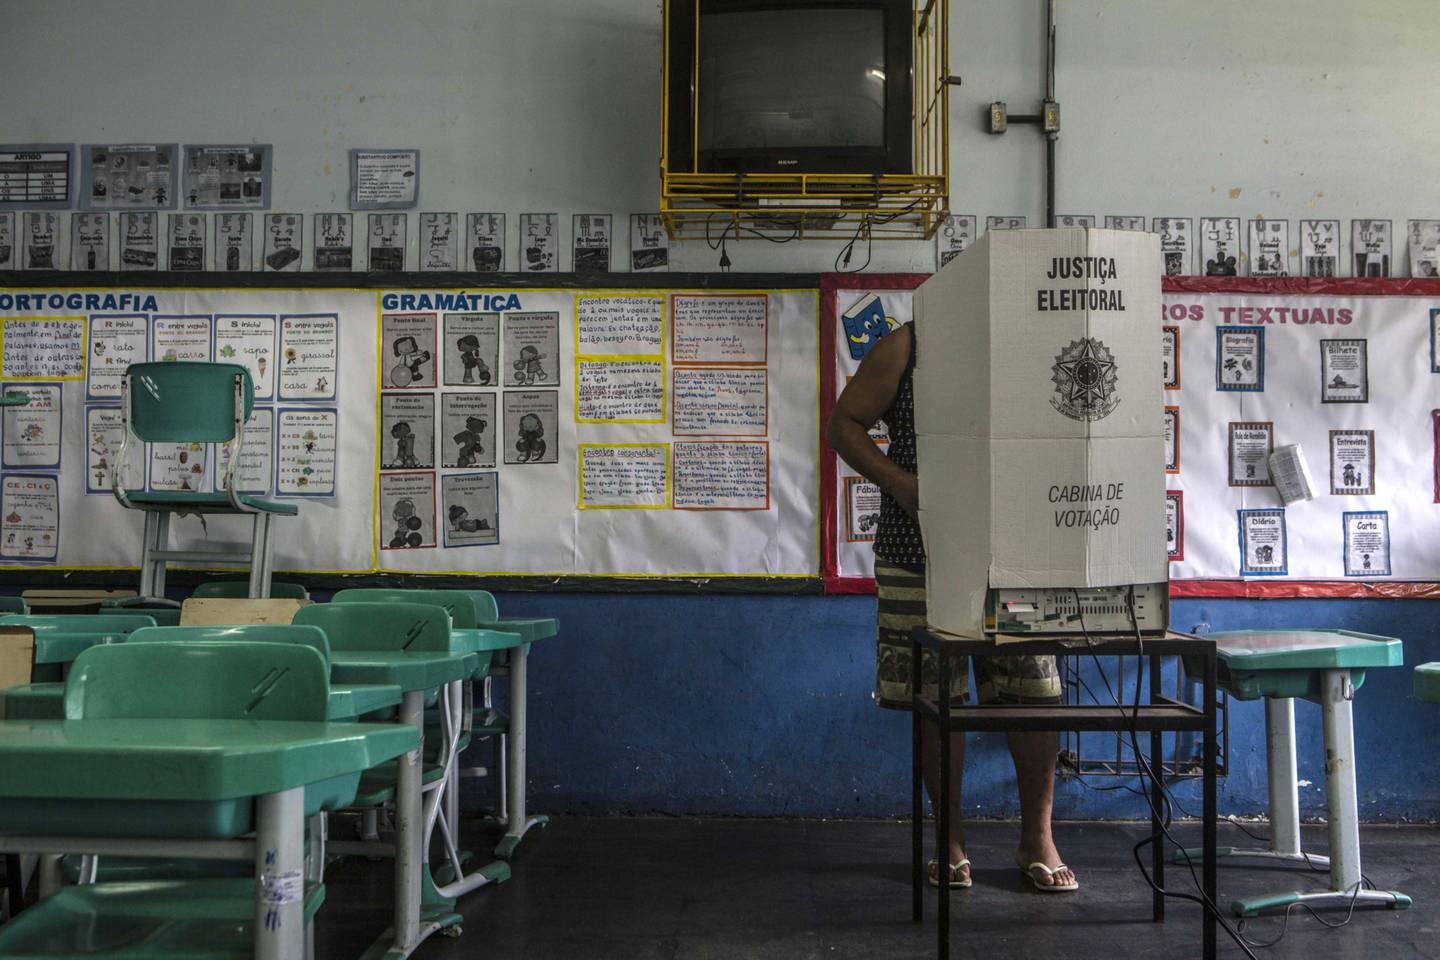 Brazilians are going to the polls deeply divided.